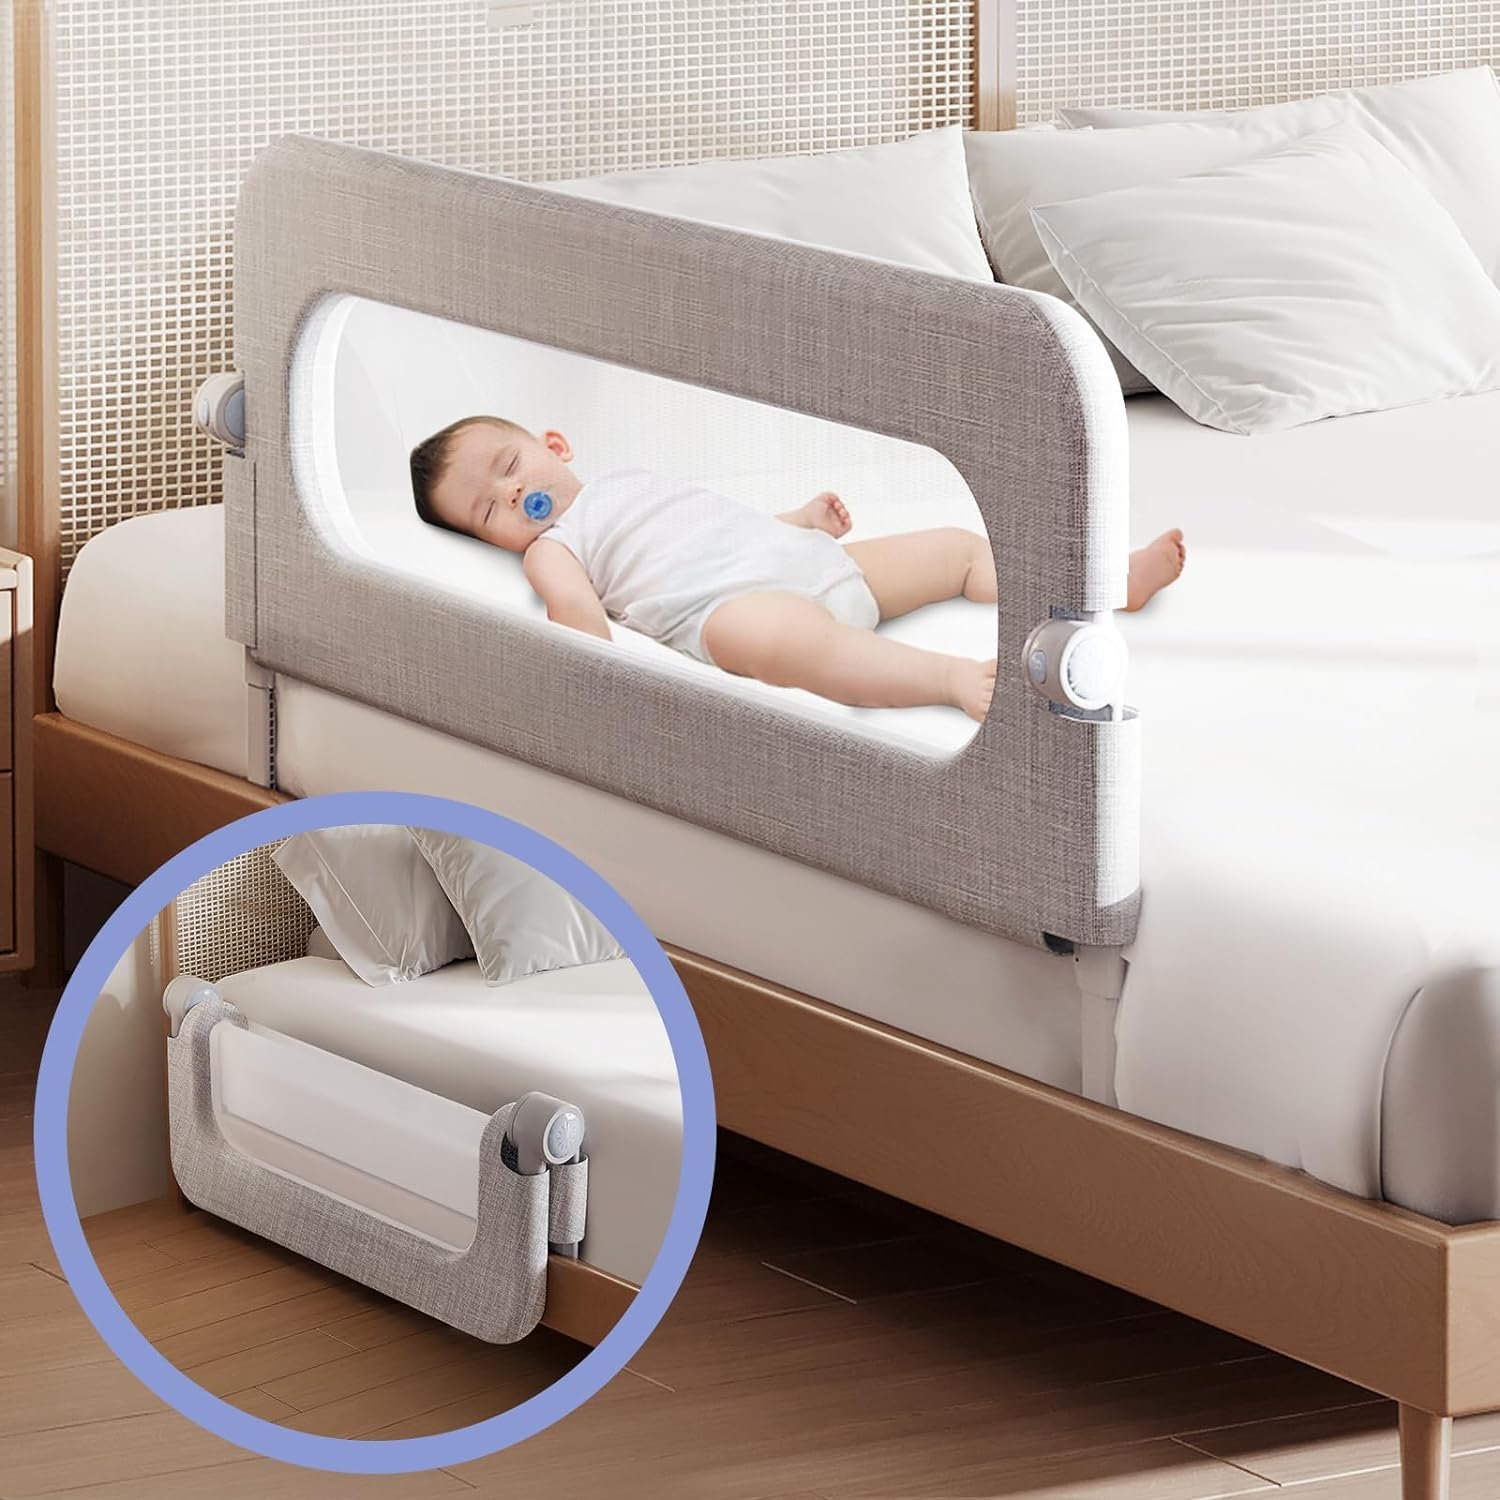 Toddler Bed Rails Review